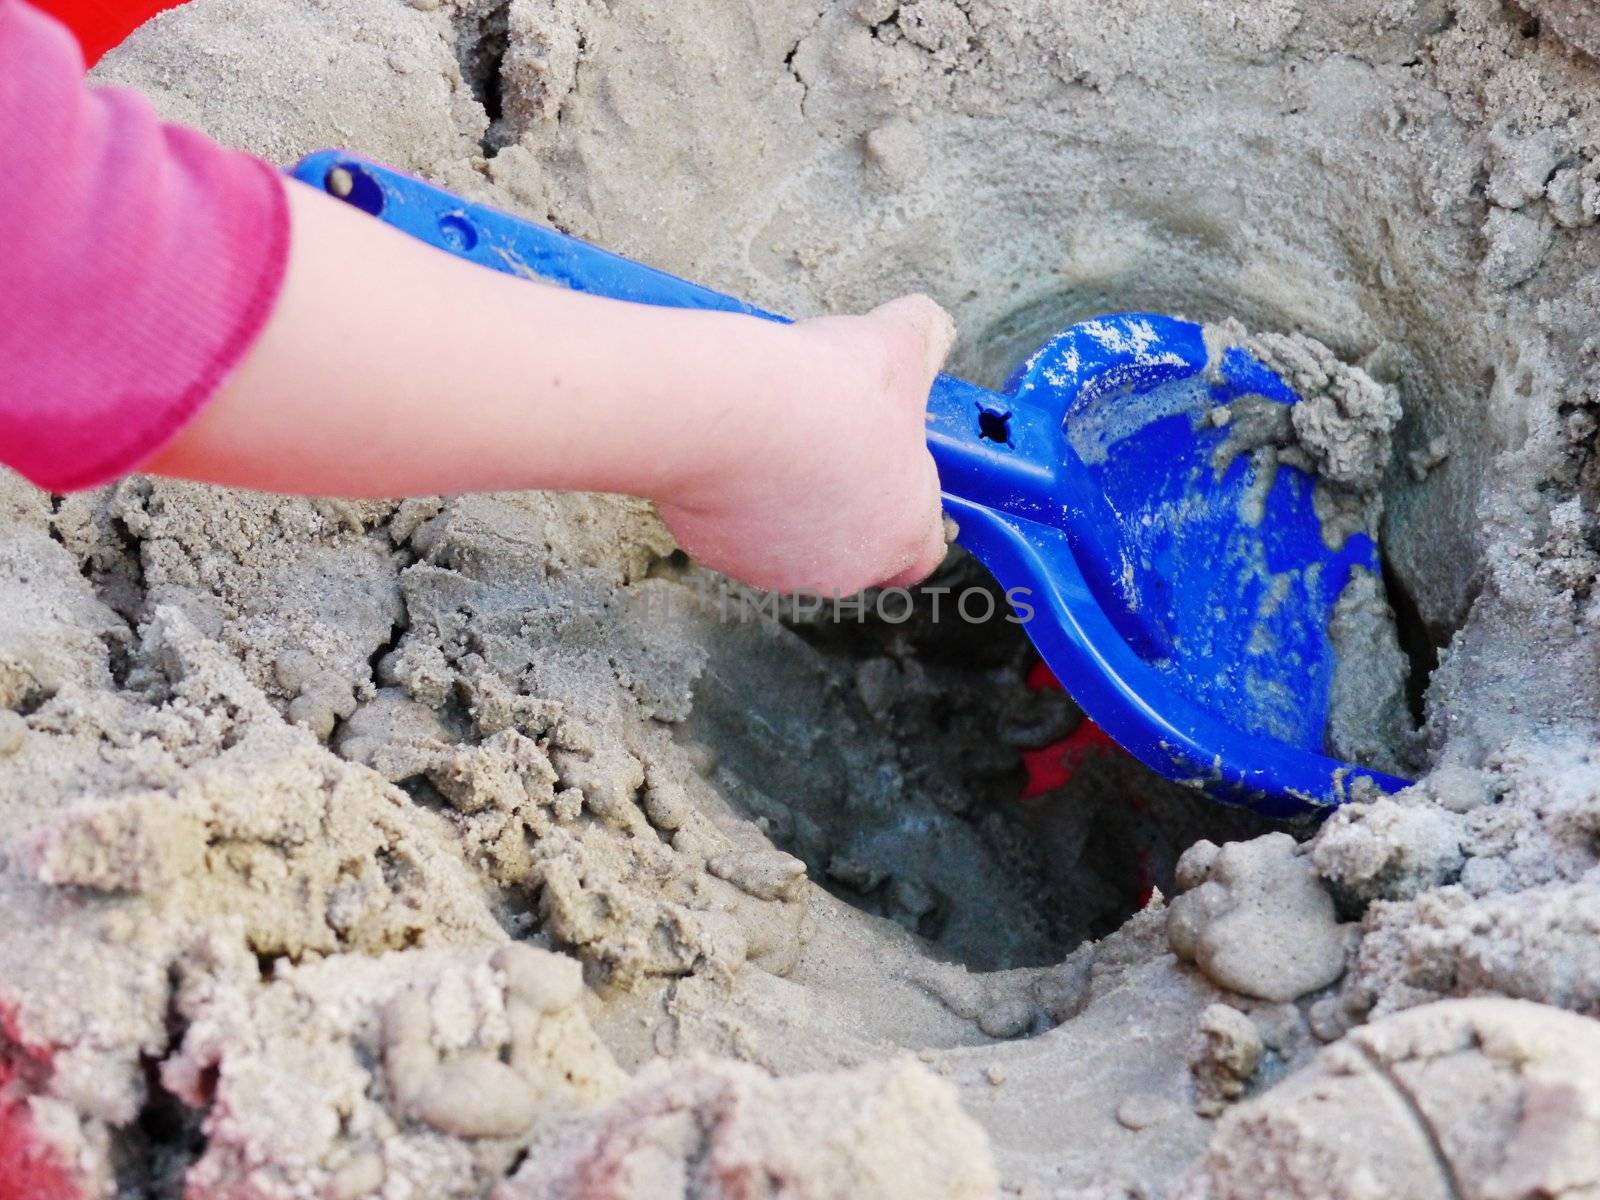 The Child game of sandbox. In frame only hands.